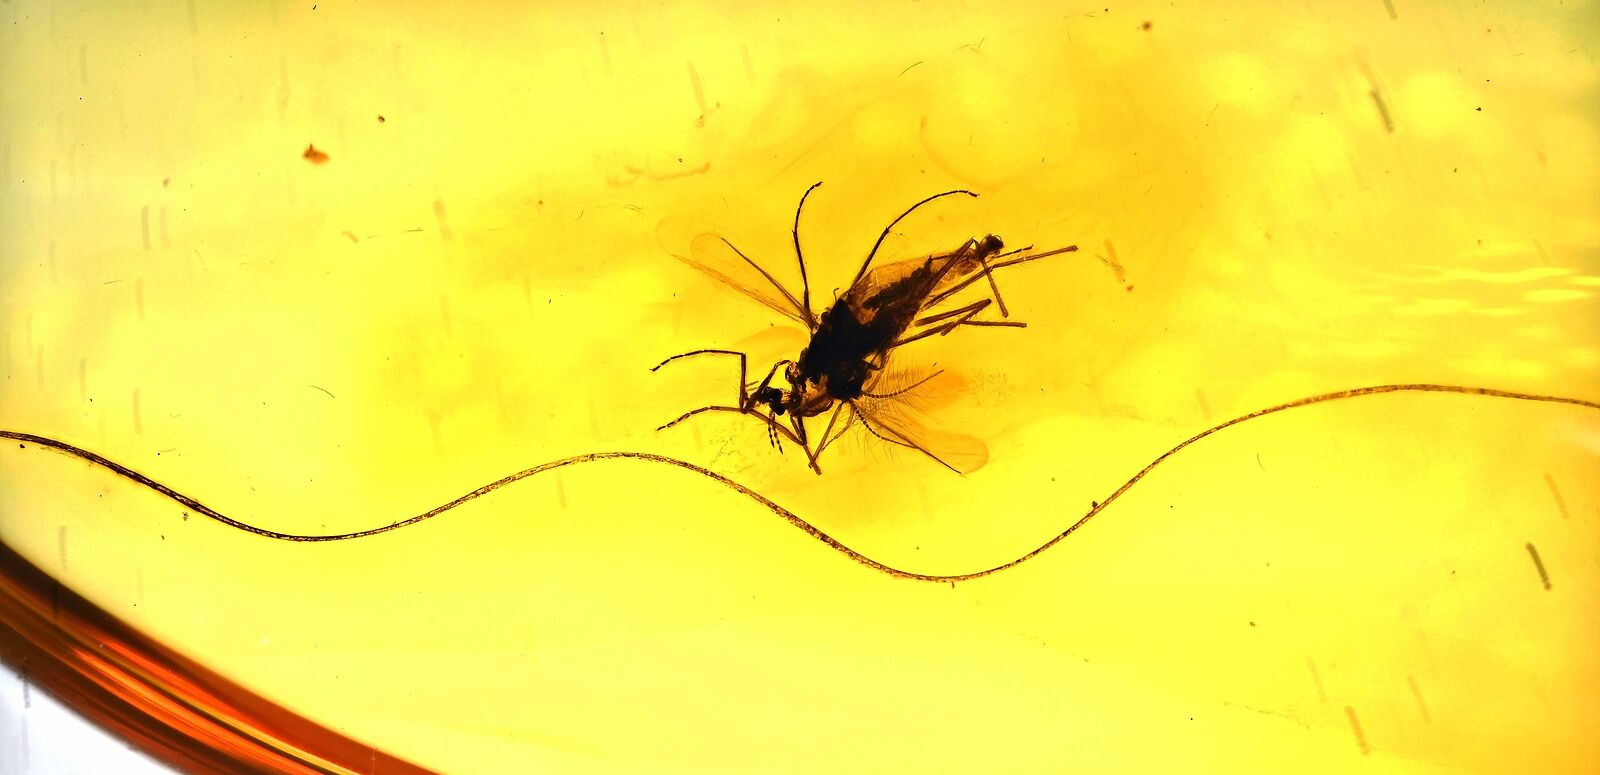 Rare Mammal Hair with Midge, Fossil Inclusion in Baltic Amber